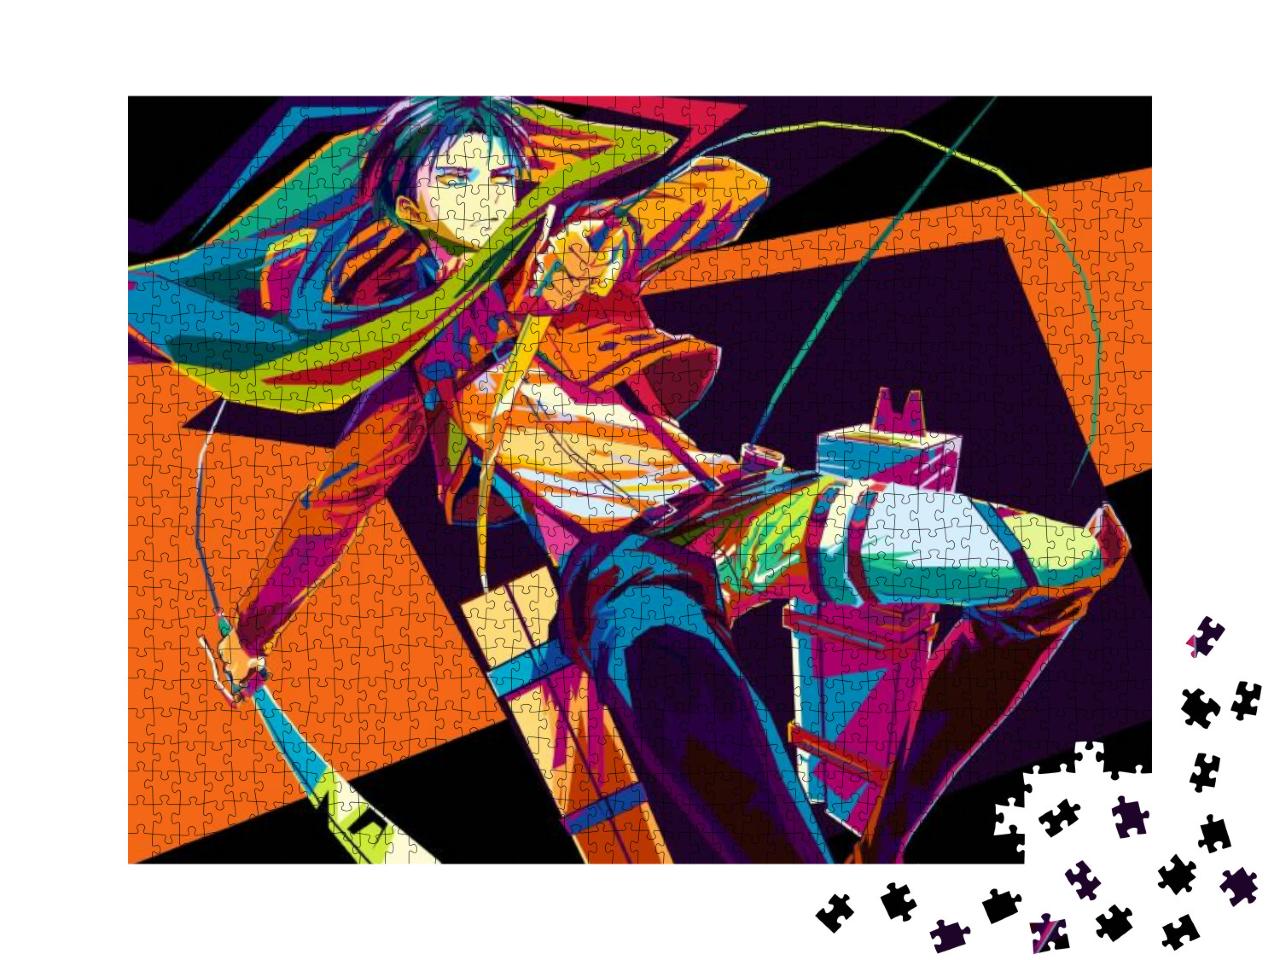 Anime Attack on Titan in Pop Art... Jigsaw Puzzle with 1000 pieces